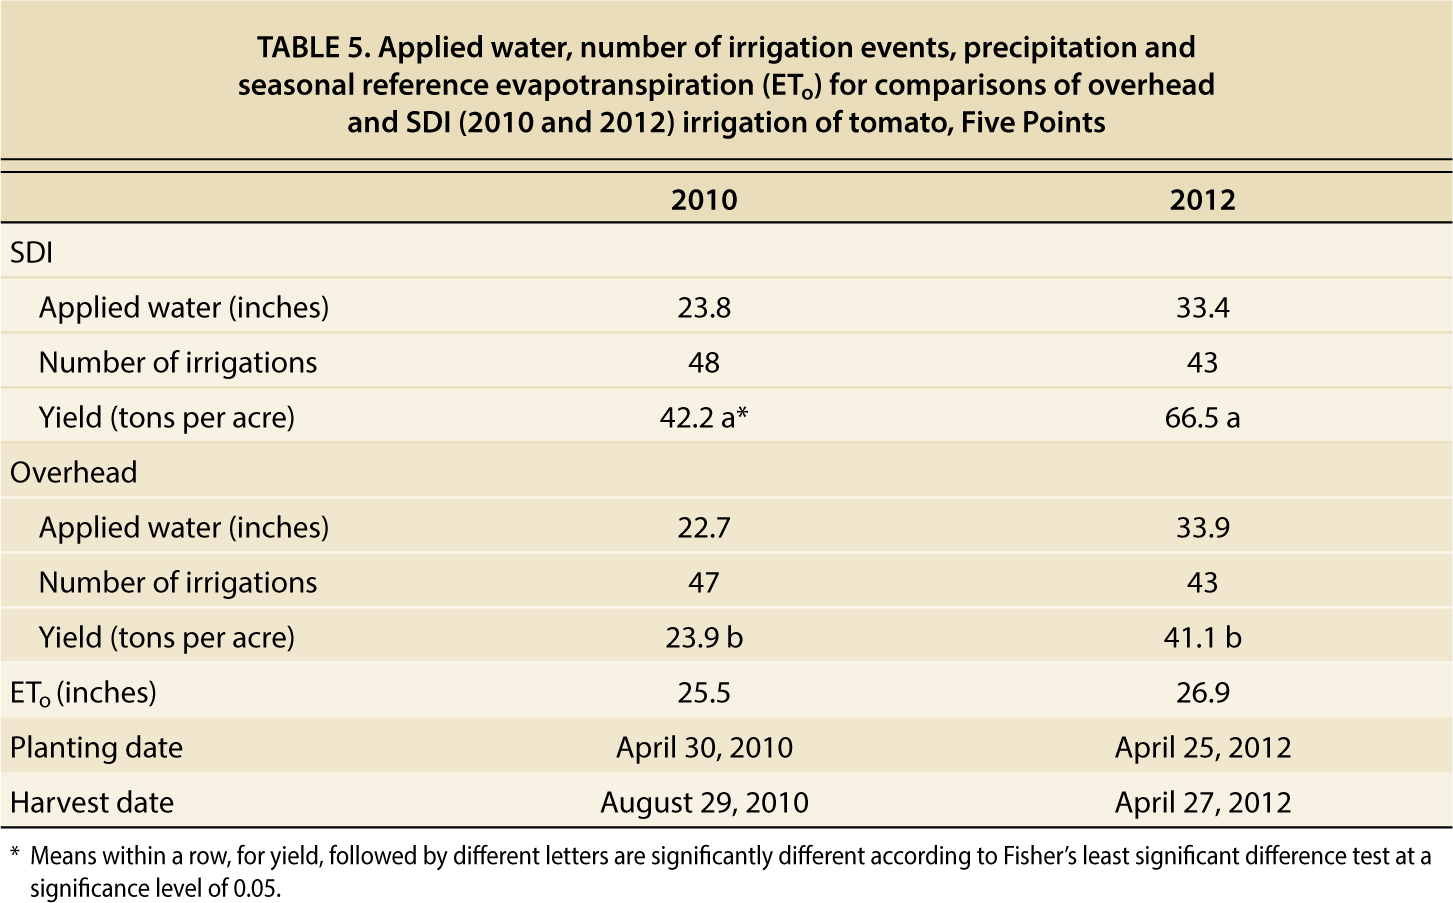 Applied water, number of irrigation events, precipitation and seasonal reference evapotranspiration (ETo) for comparisons of overhead and SDI (2010 and 2012) irrigation of tomato, Five Points